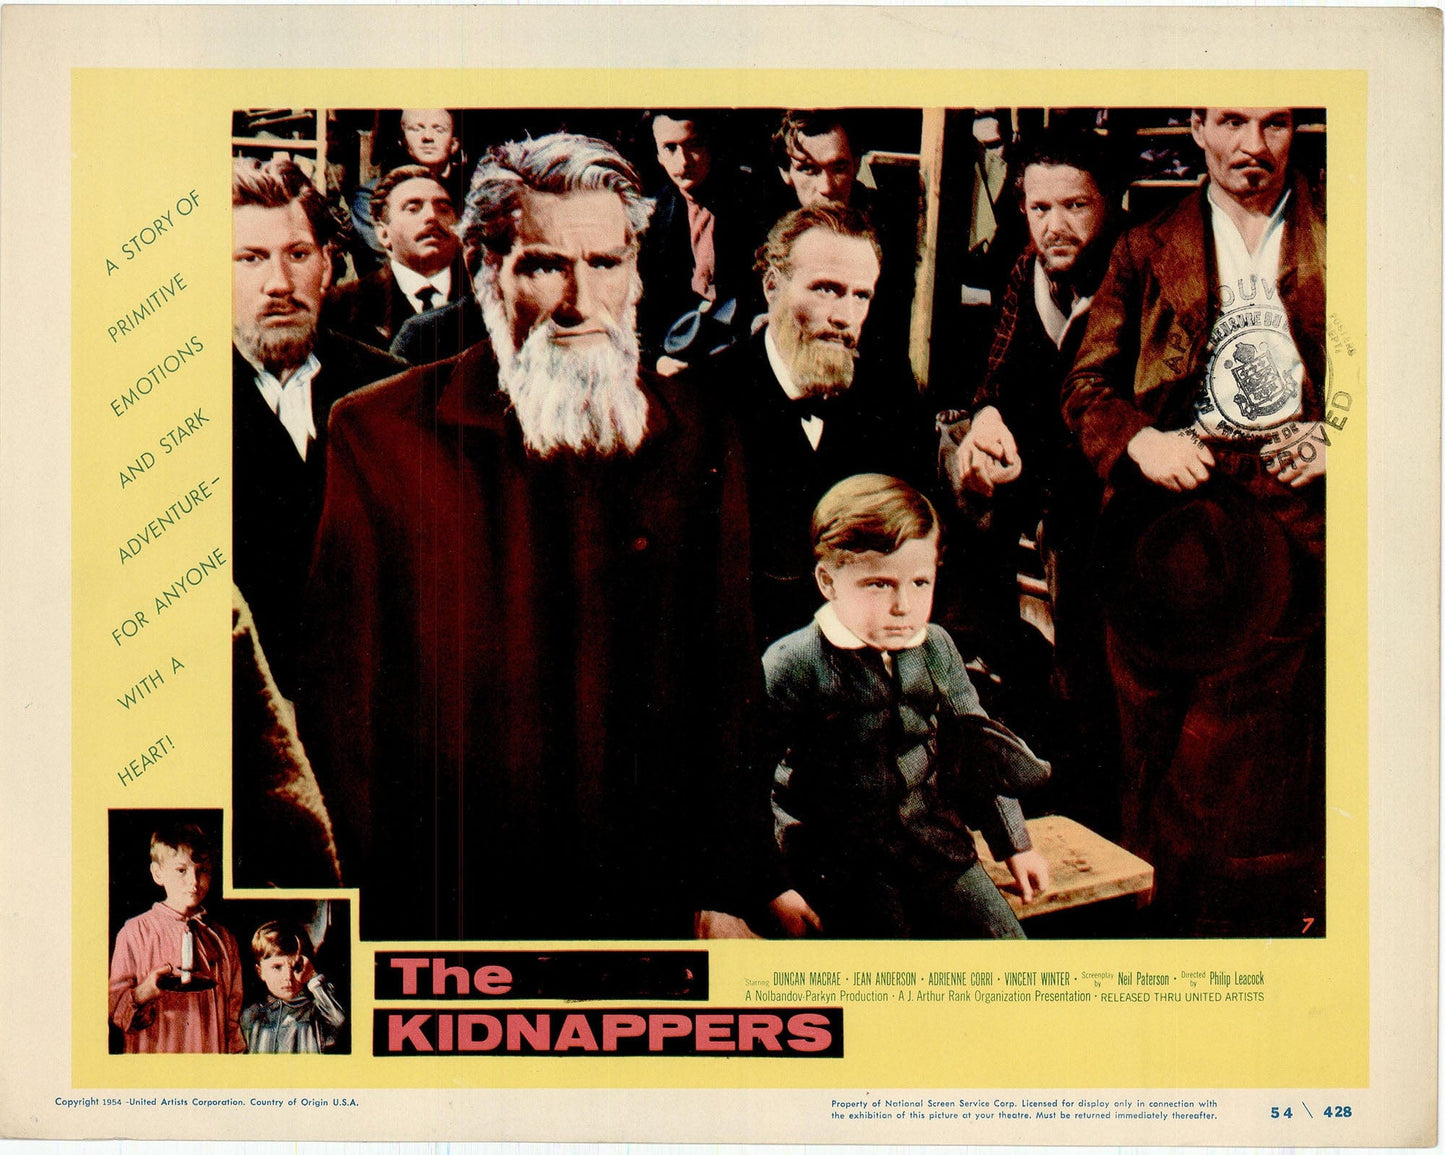 The Little Kidnappers - Movie Lobby Card